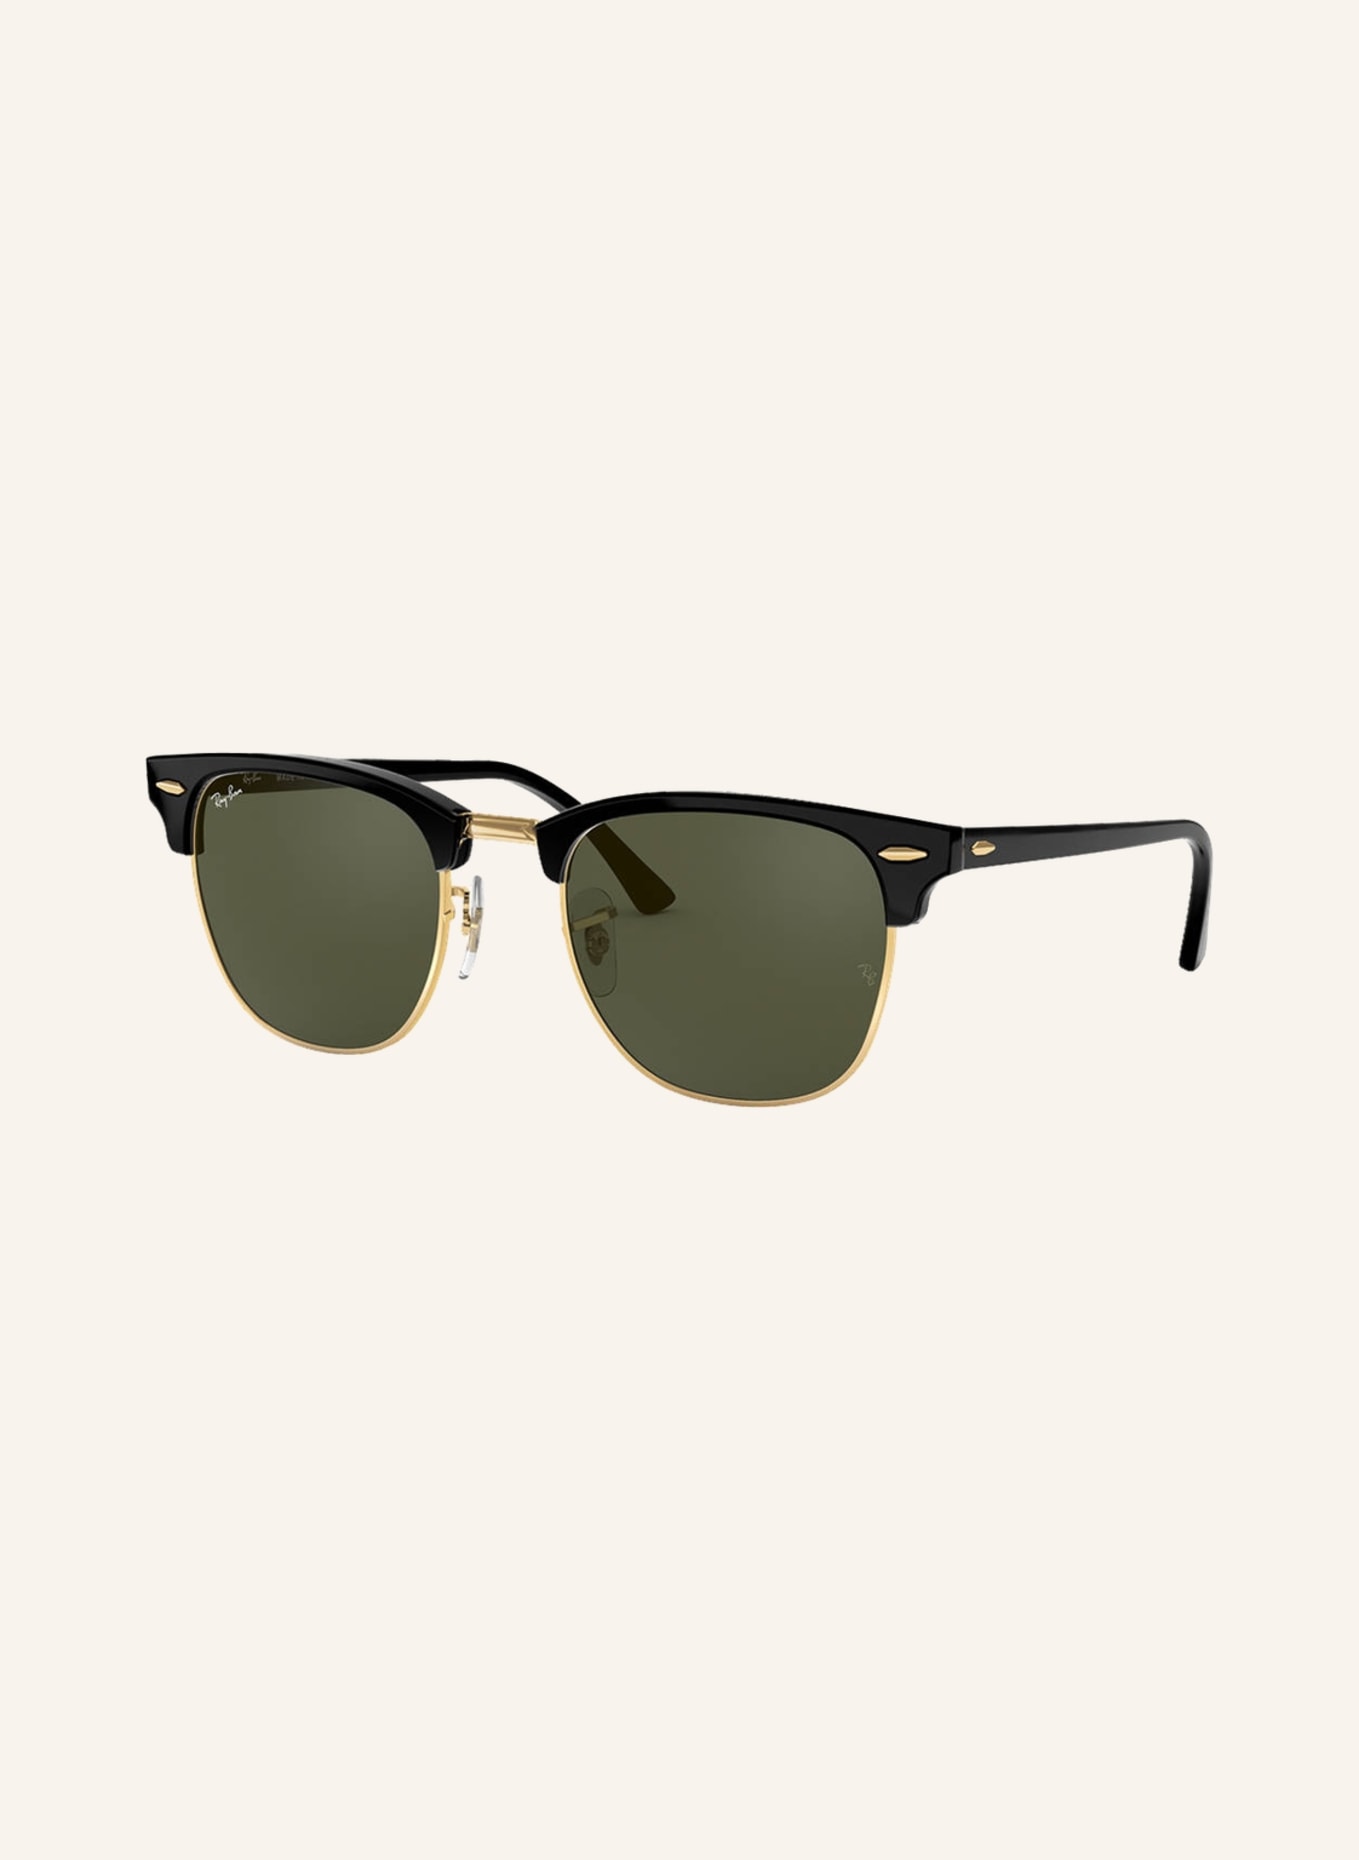 Ray-Ban Sunglasses RB3016 CLUBMASTER, Color: W0365 - BLACK/GOLD / DARK GREEN (Image 1)